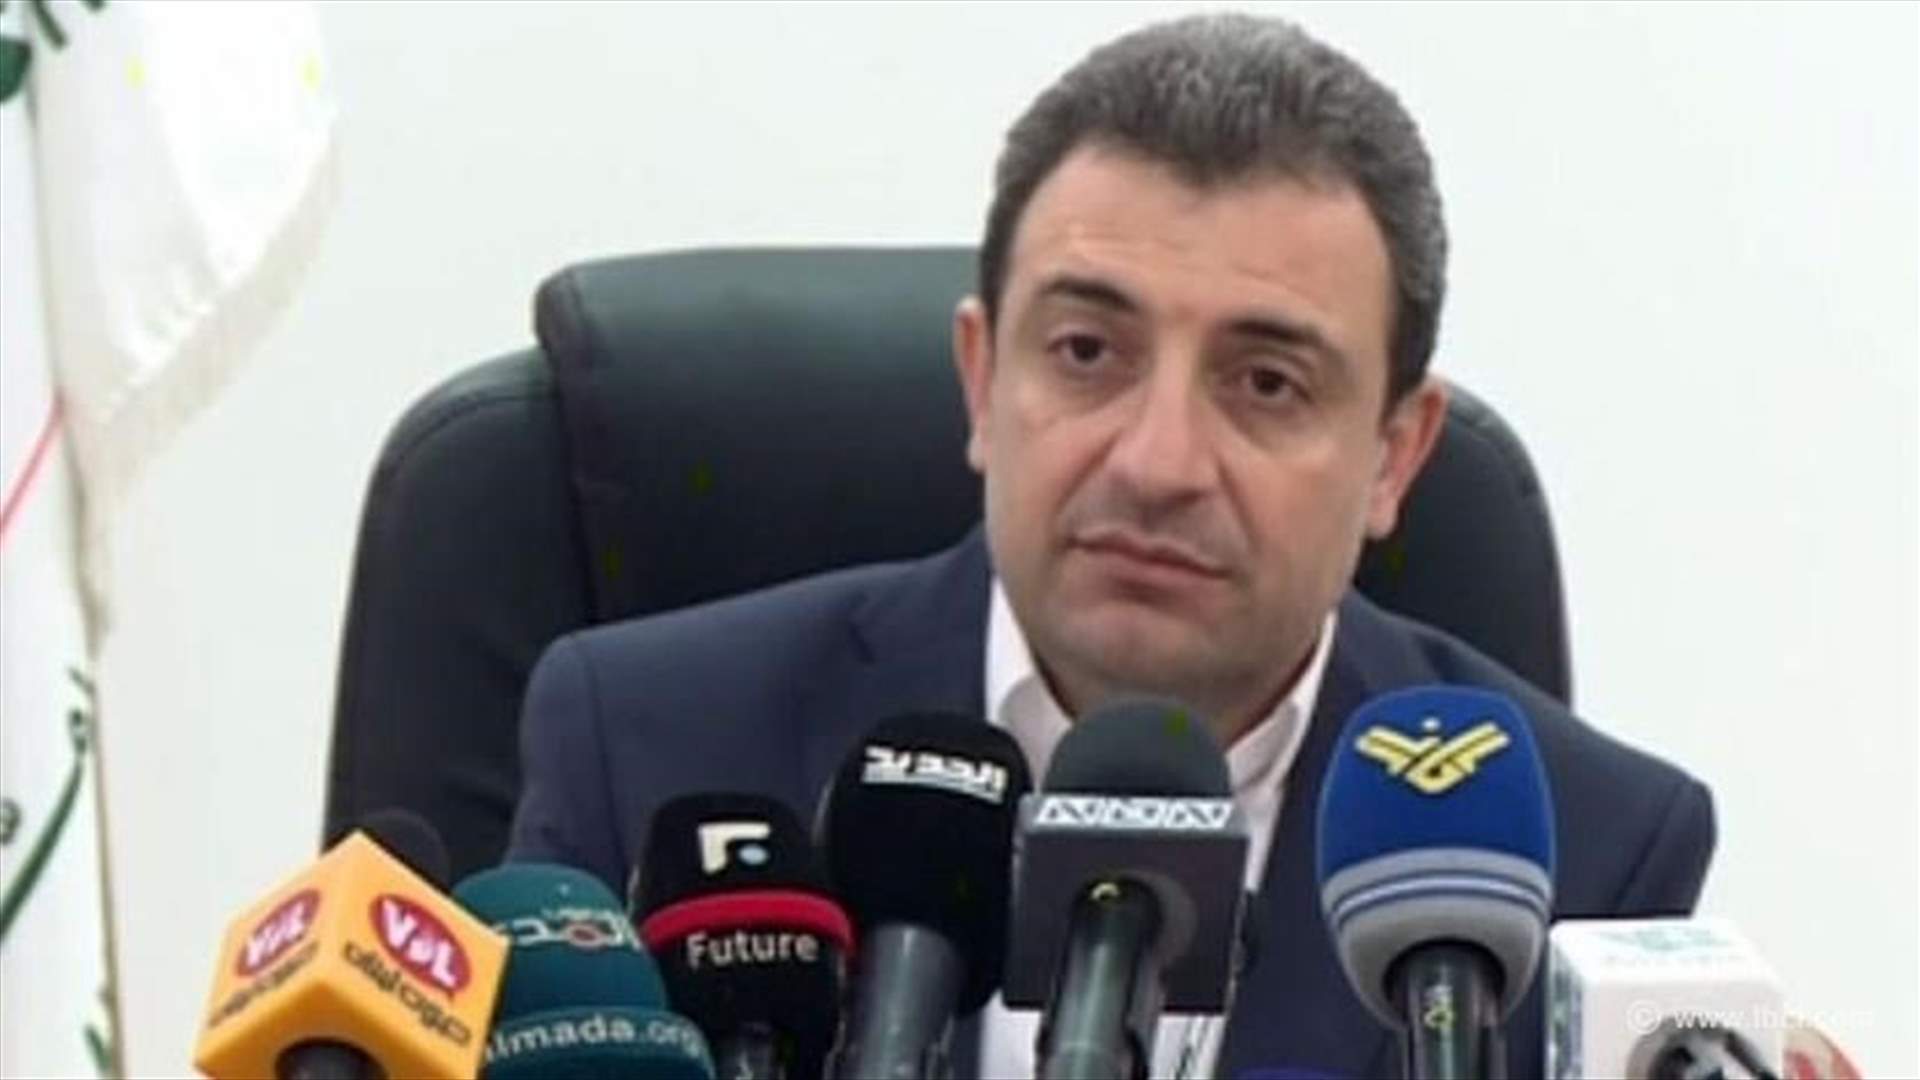 Minister Abou Faour says NSSF should cover 100% of chronic illness medications costs